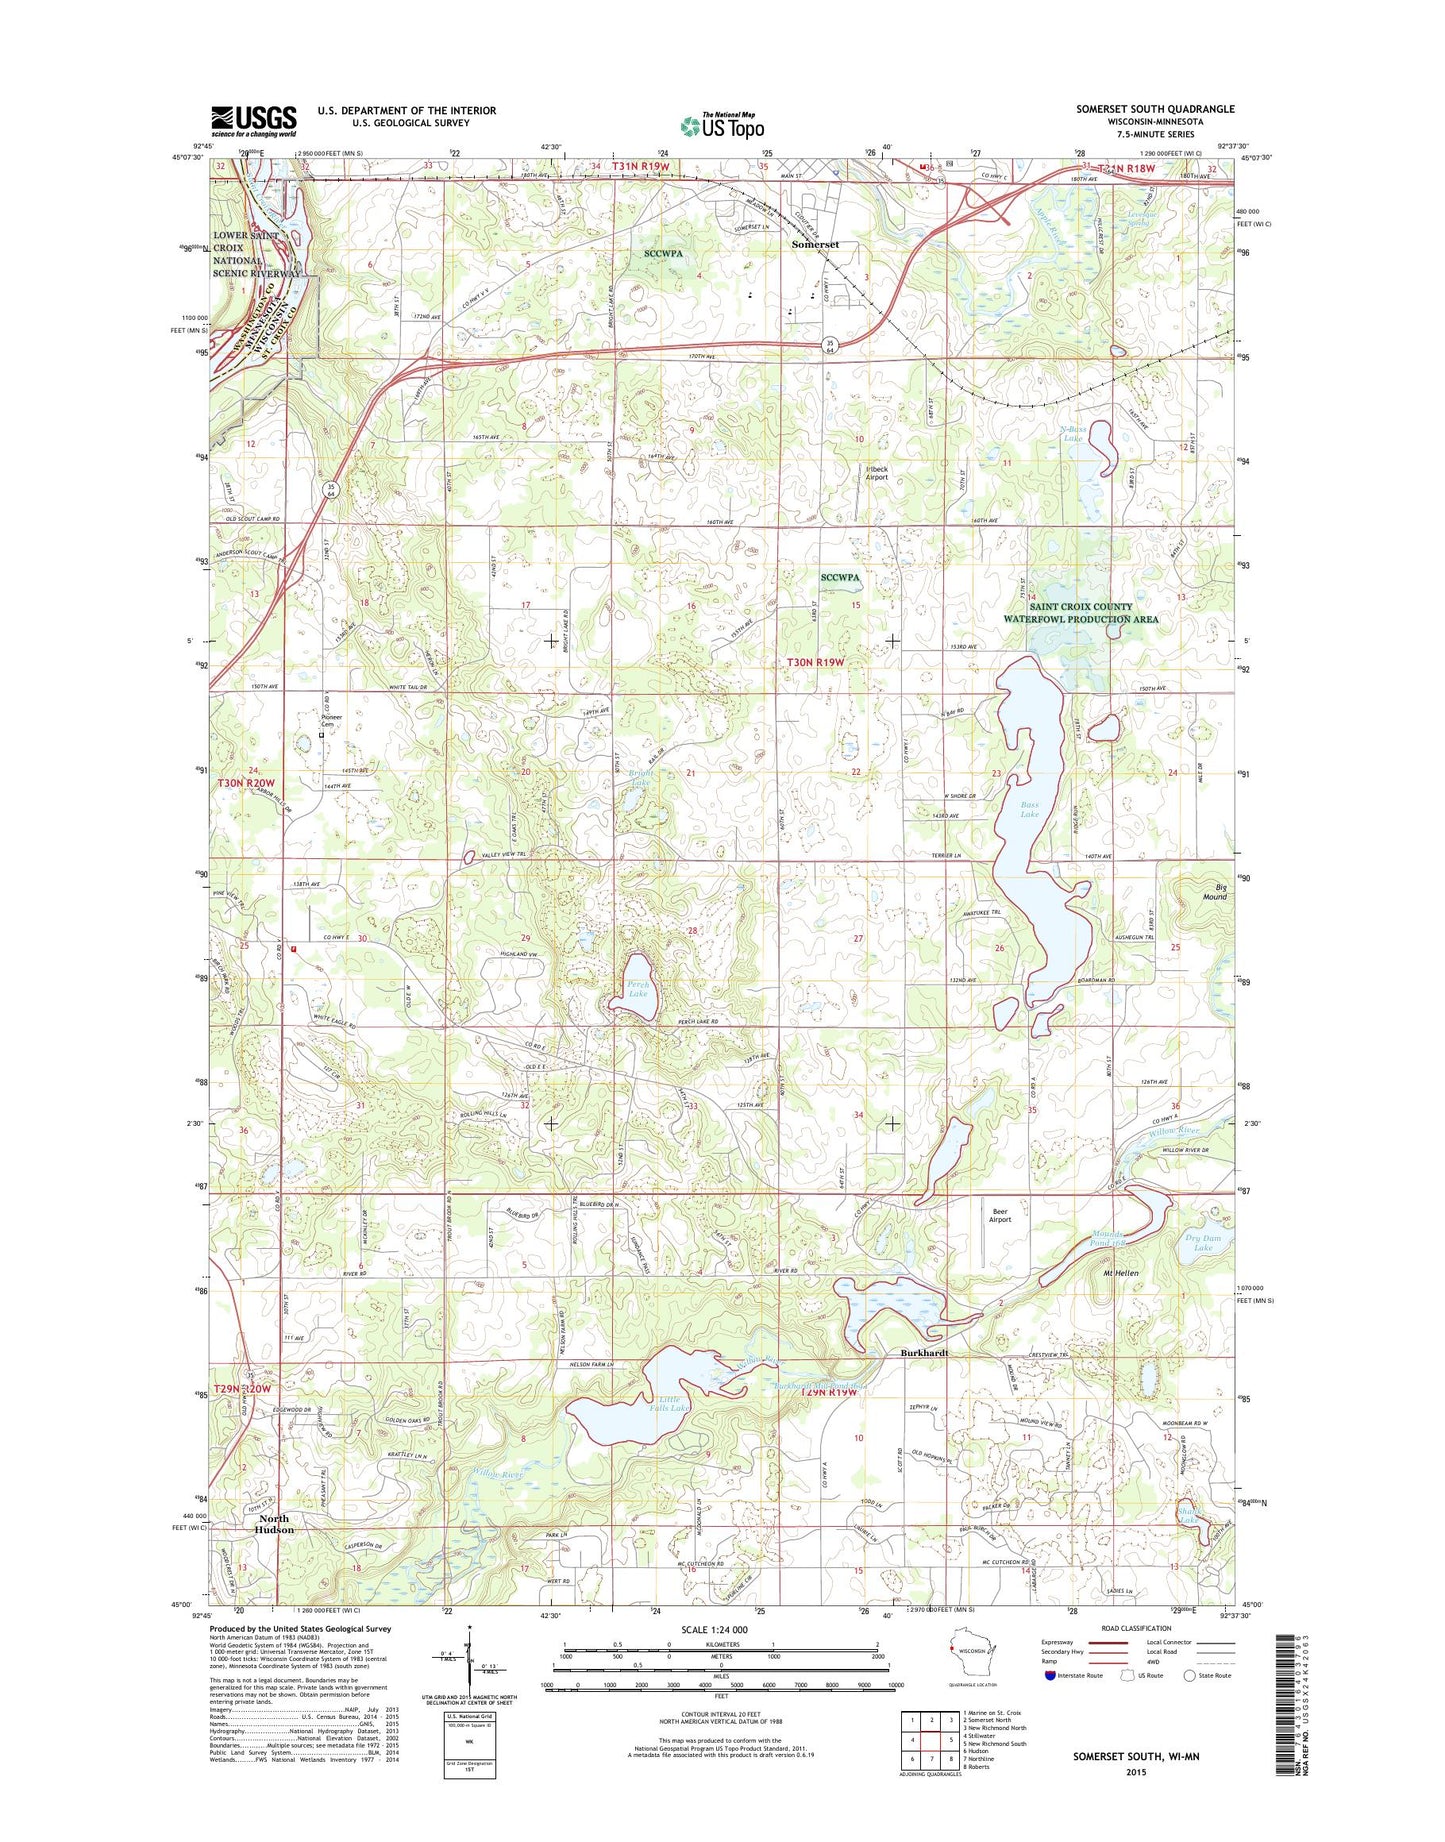 Somerset South Wisconsin US Topo Map Image